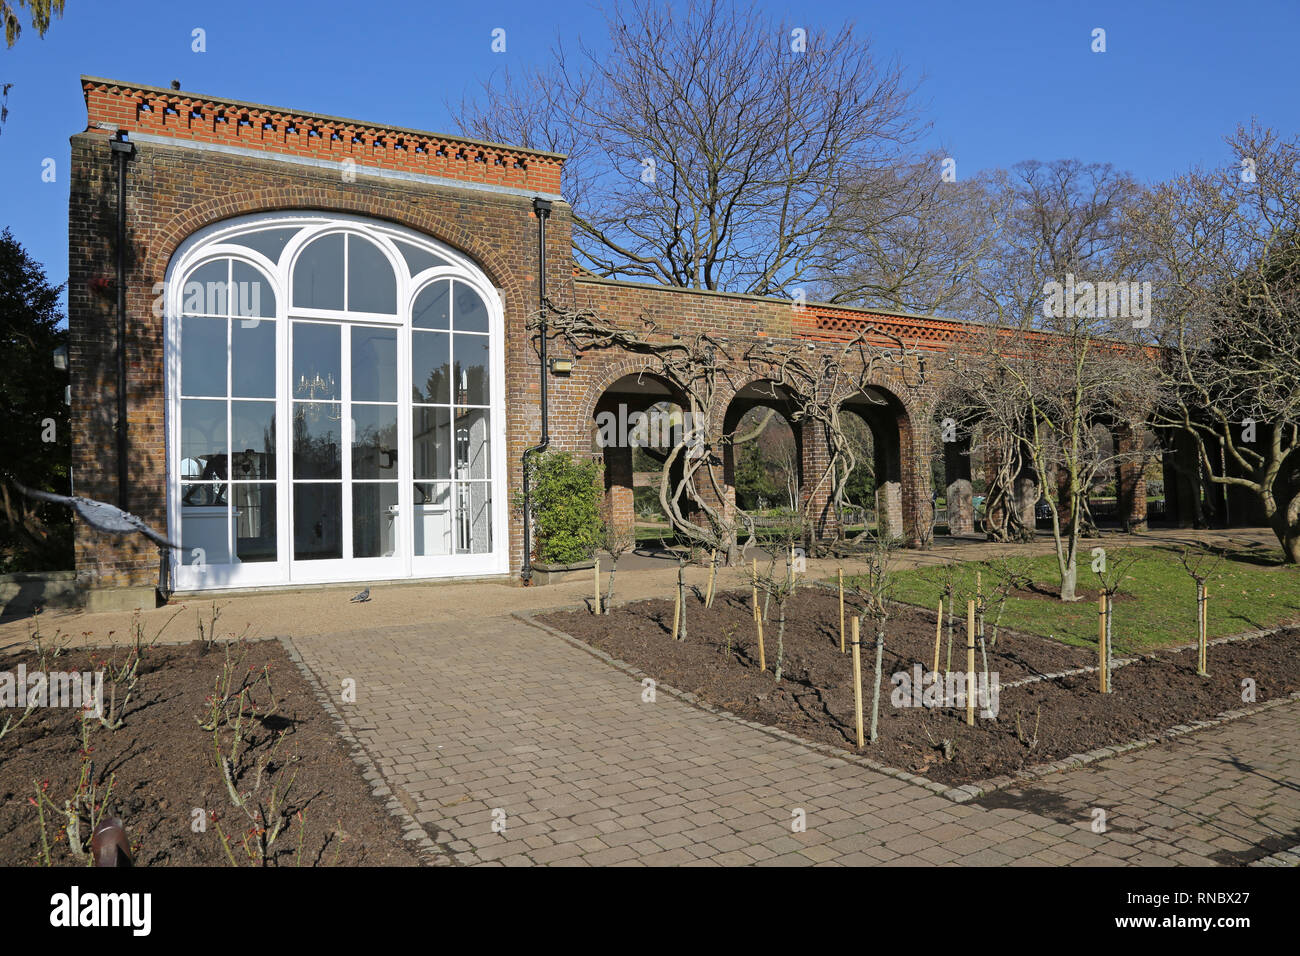 The Orangery in Holland Park, Kensington, London. A gallery and function space in one of the city's wealthiest areas. Stock Photo